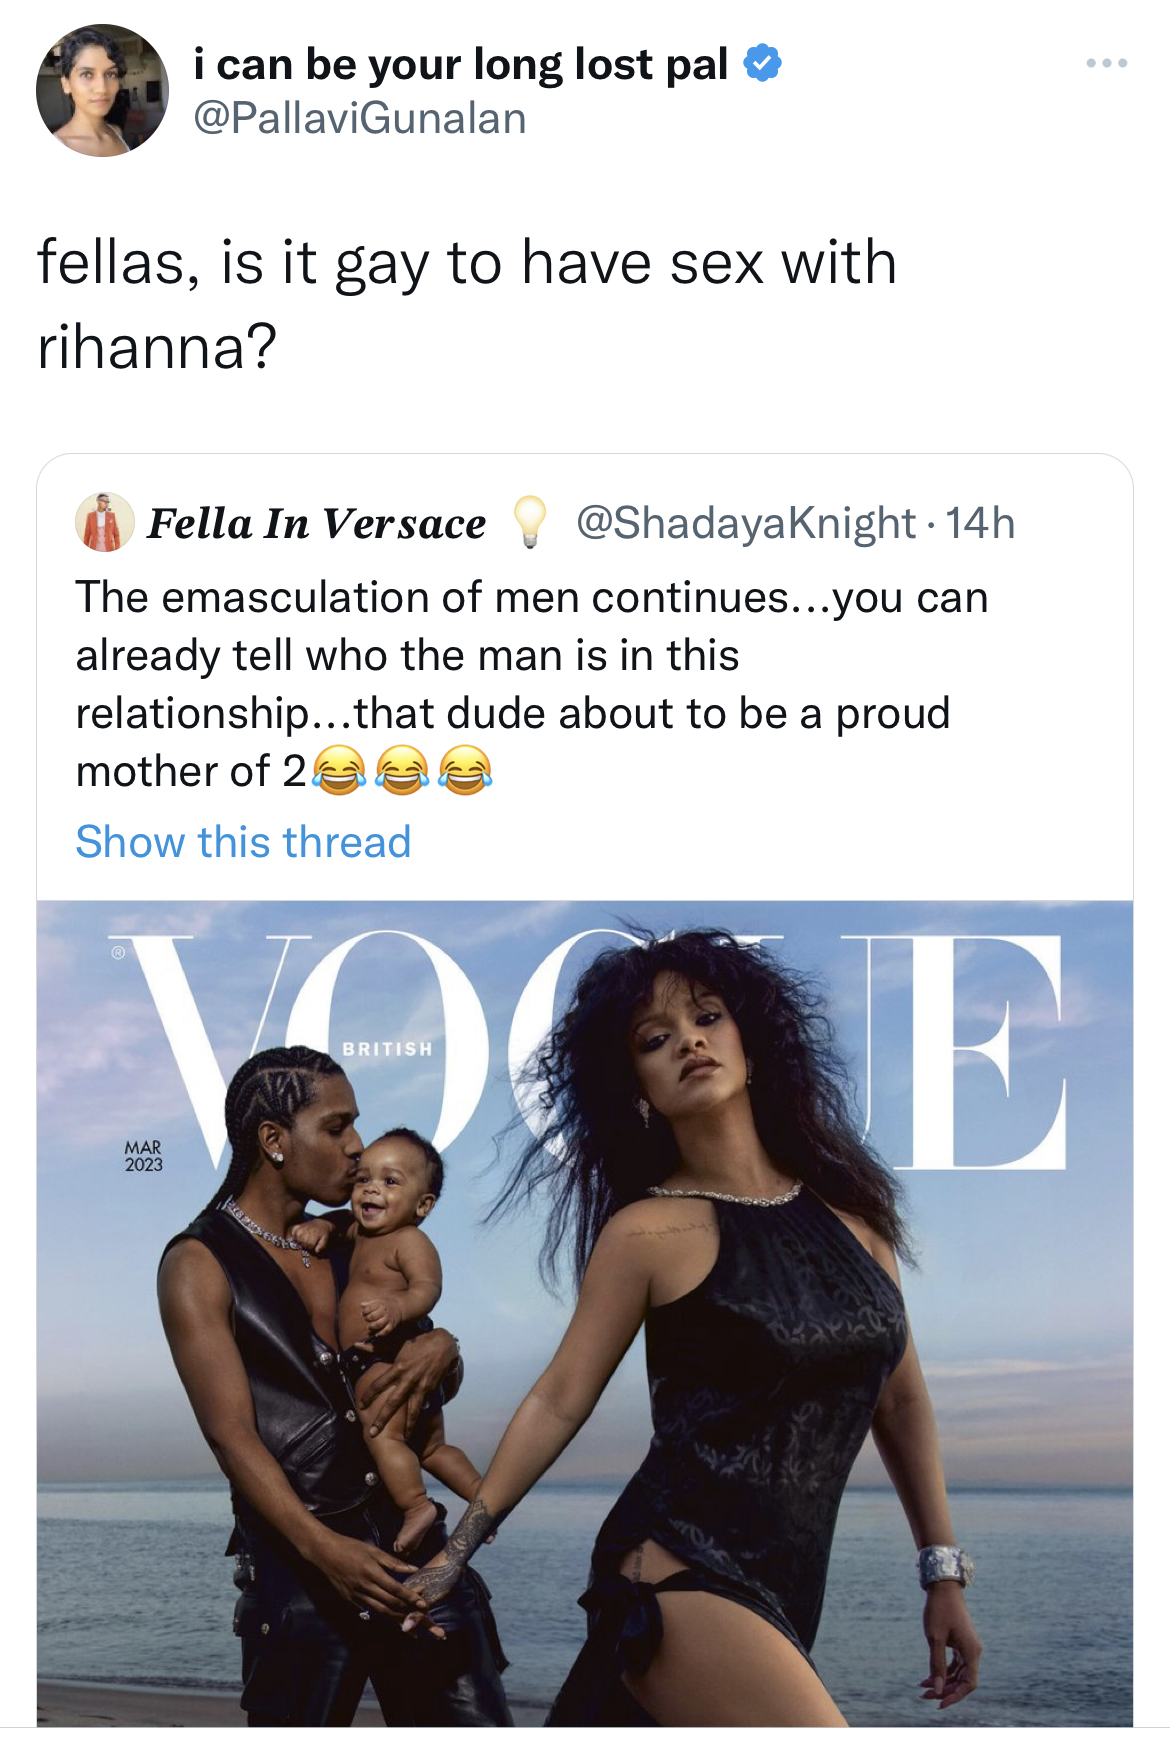 deranged tweets - Rihanna - i can be your long lost pal fellas, is it gay to have sex with rihanna? Fella In Versace The emasculation of men continues...you can already tell who the man is in this relationship...that dude about to be a proud mother of 2 S